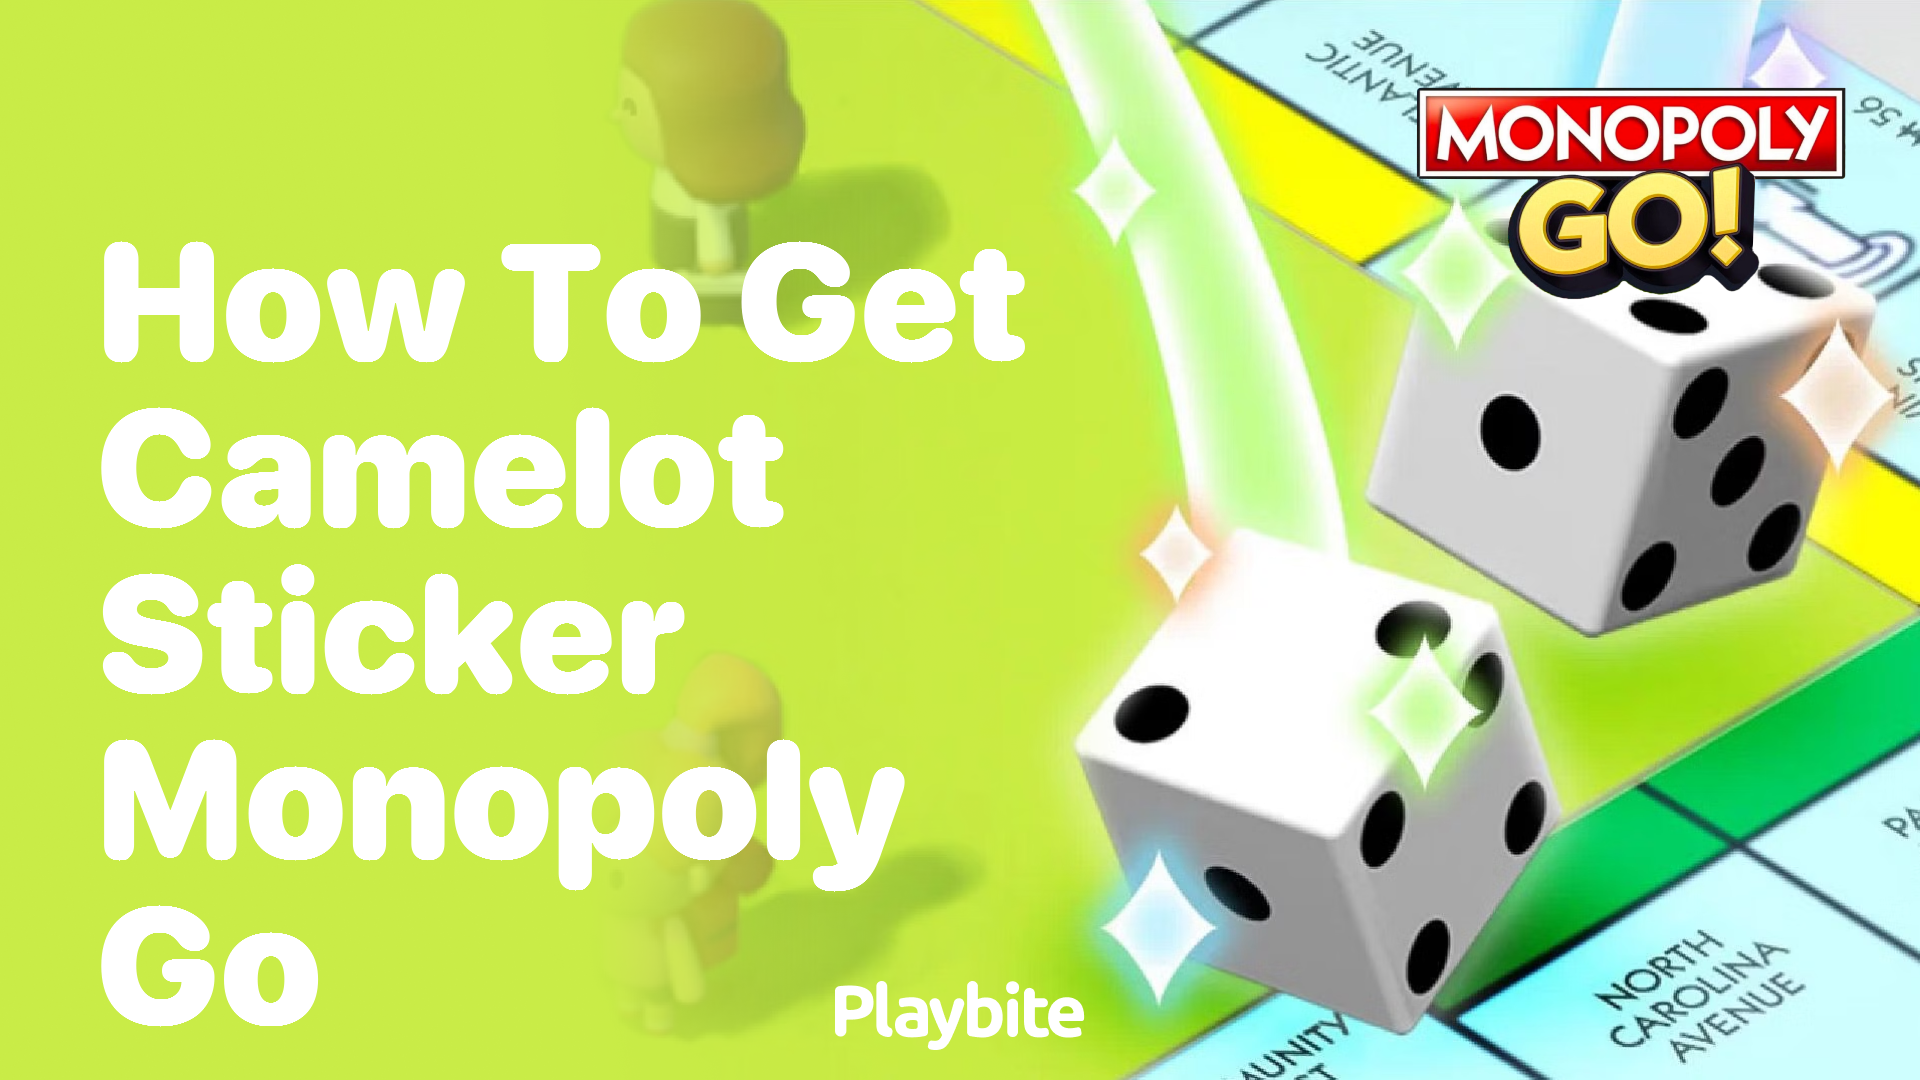 How to Get the Camelot Sticker in Monopoly Go